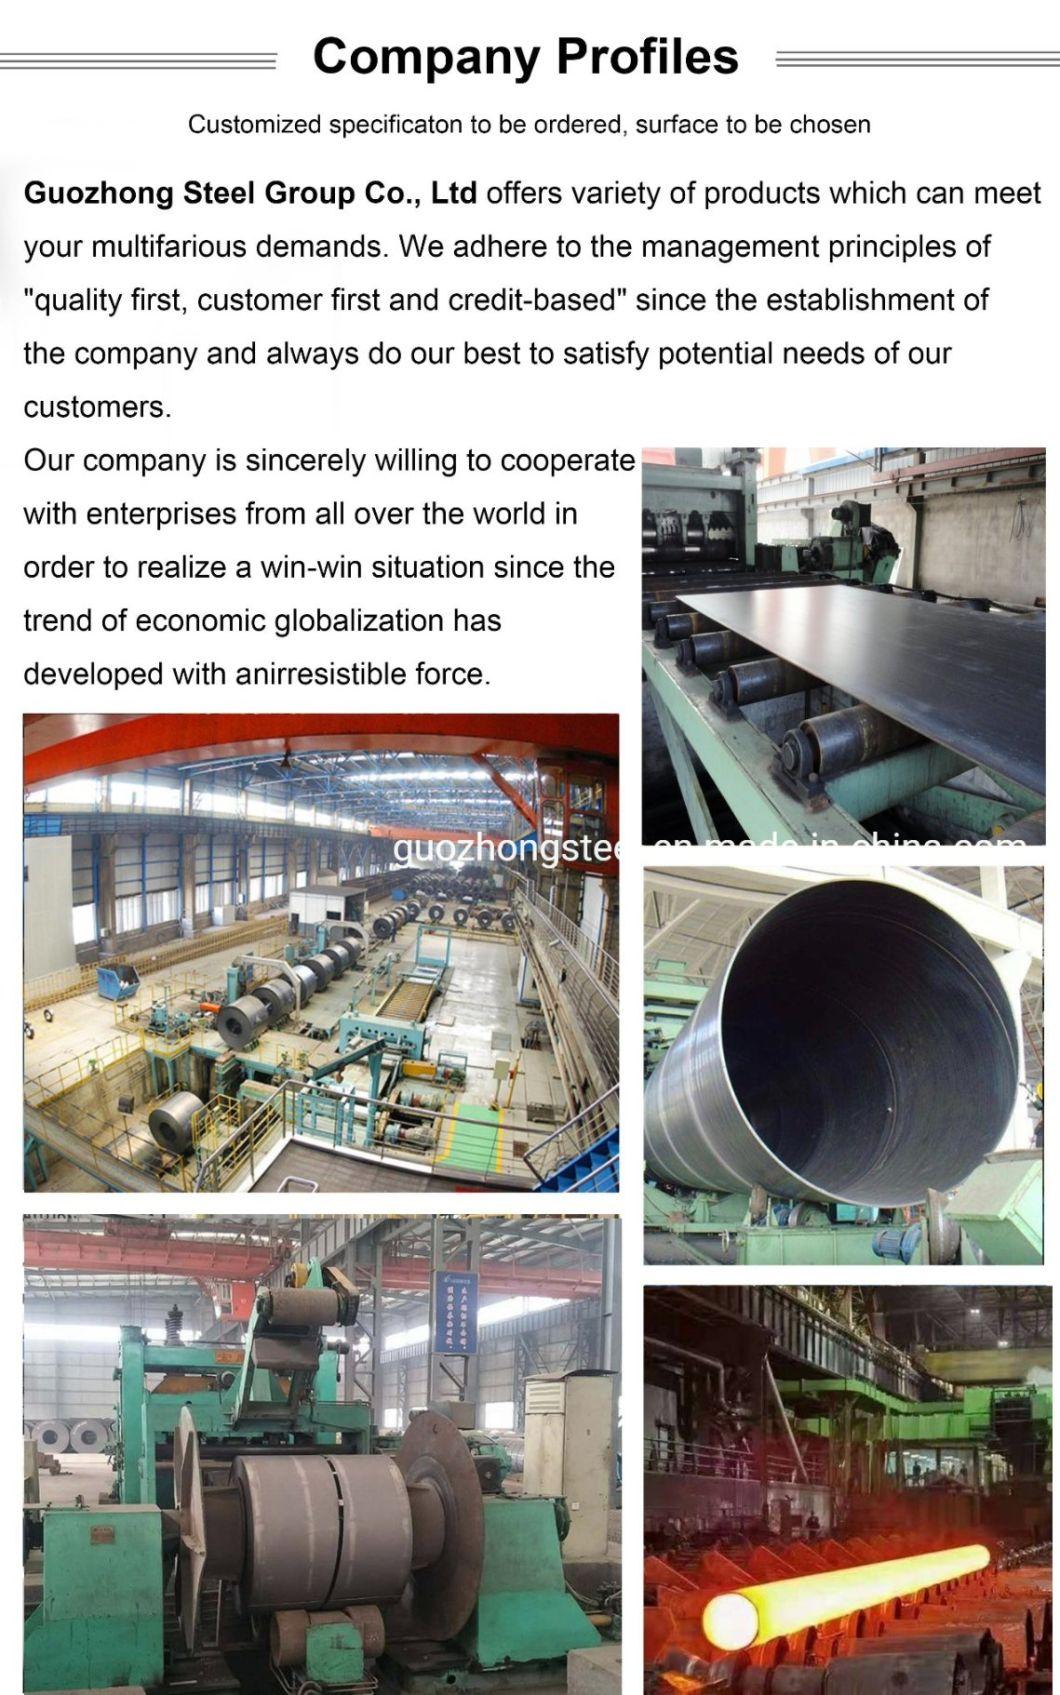 AISI 4135 Seamless Schedule 40 Carbon Alloy Steel Pipe